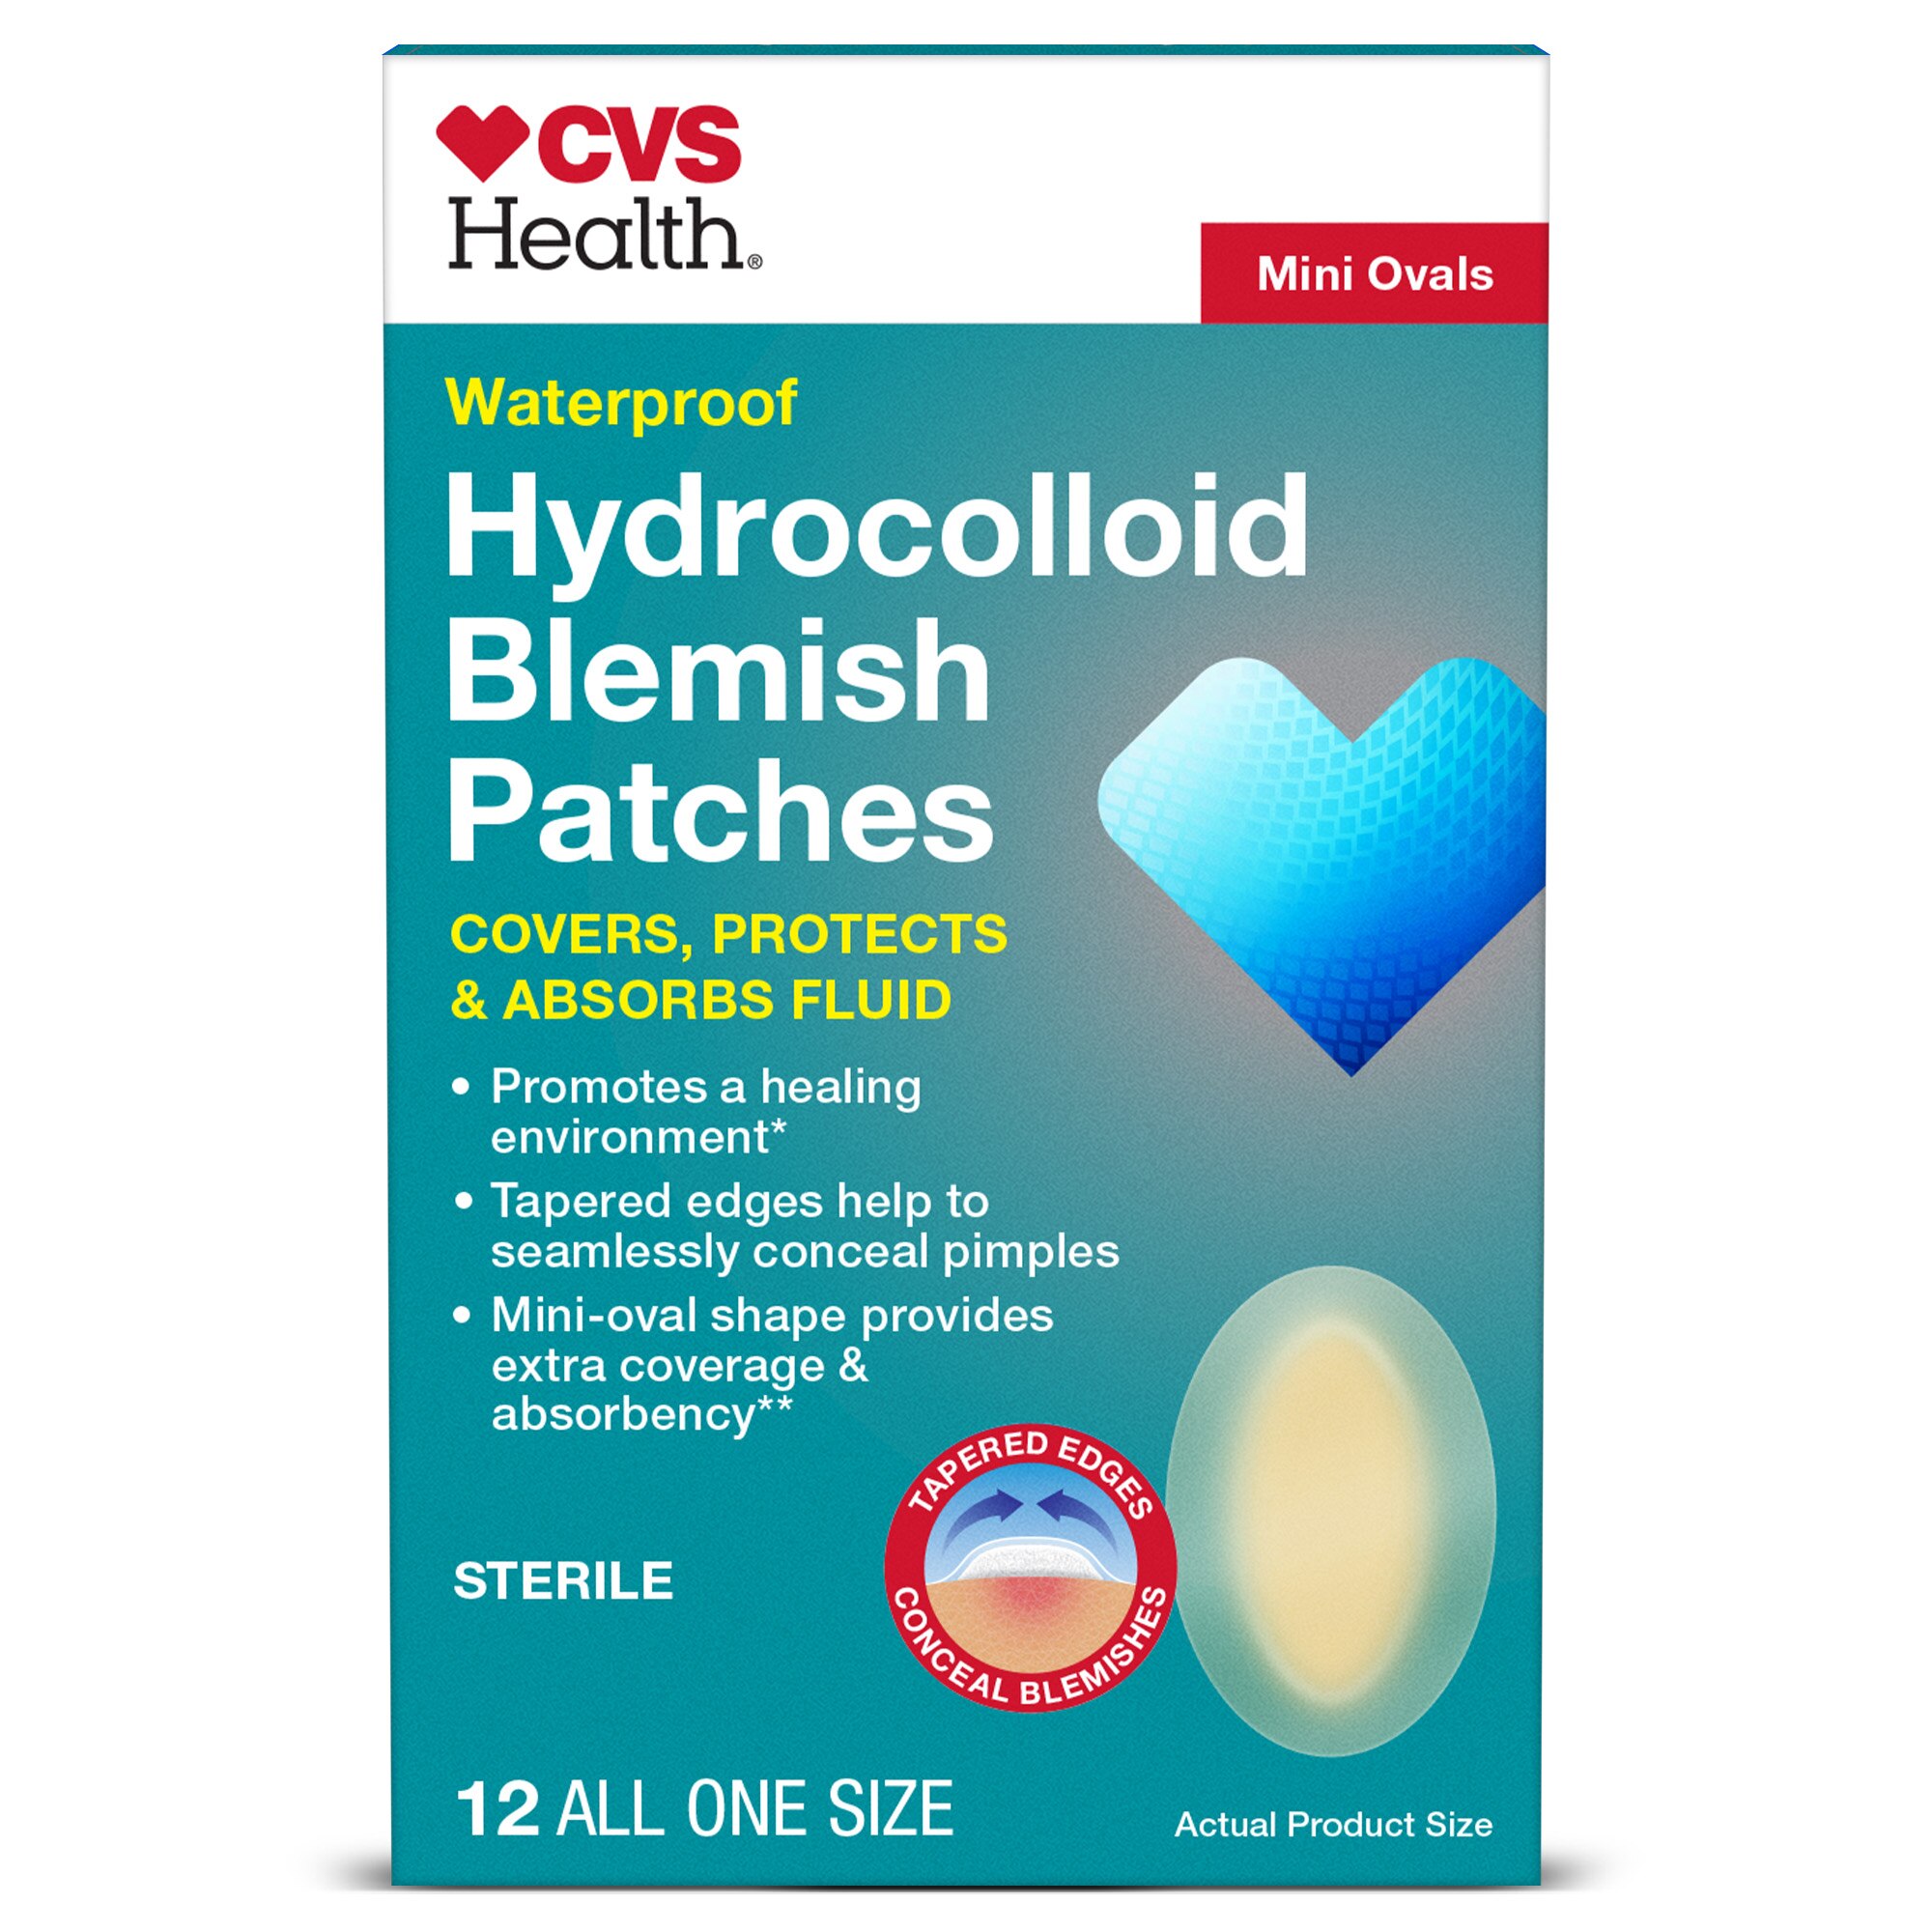 CVS Health Waterproof Hydrocolloid Blemish Patches, 12 CT